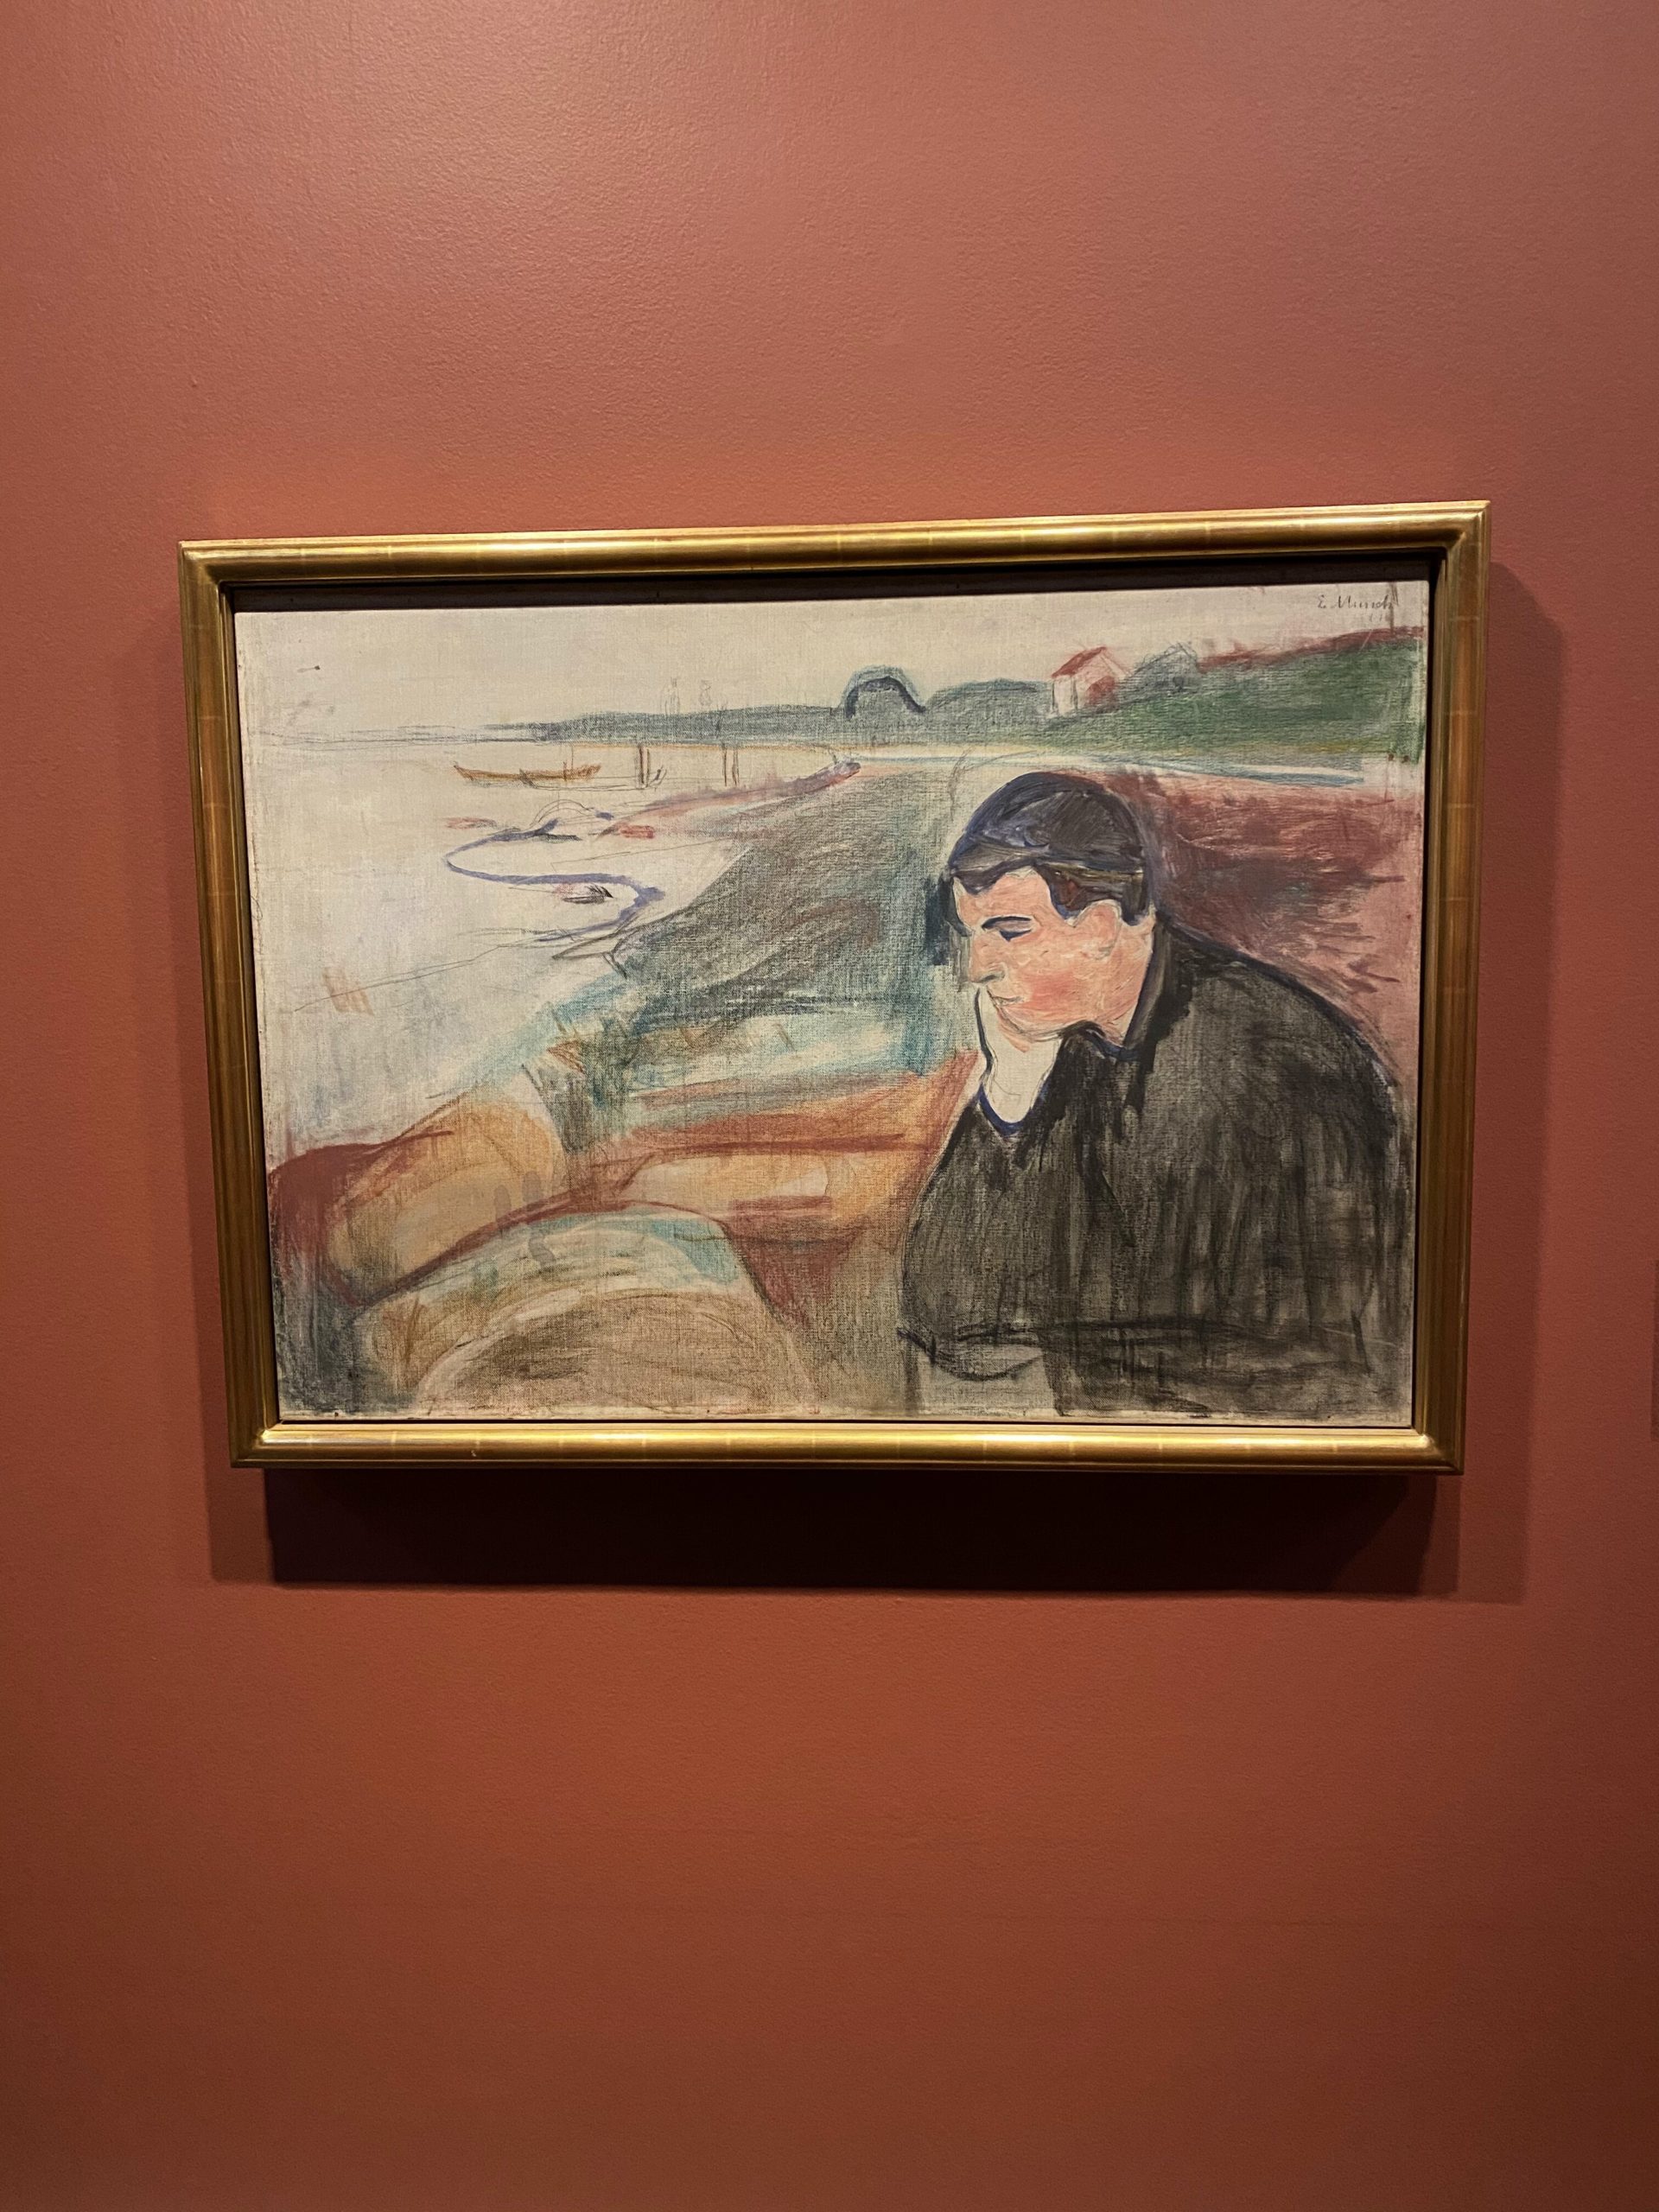 Painting by Munch at the Munch Museum in Oslo